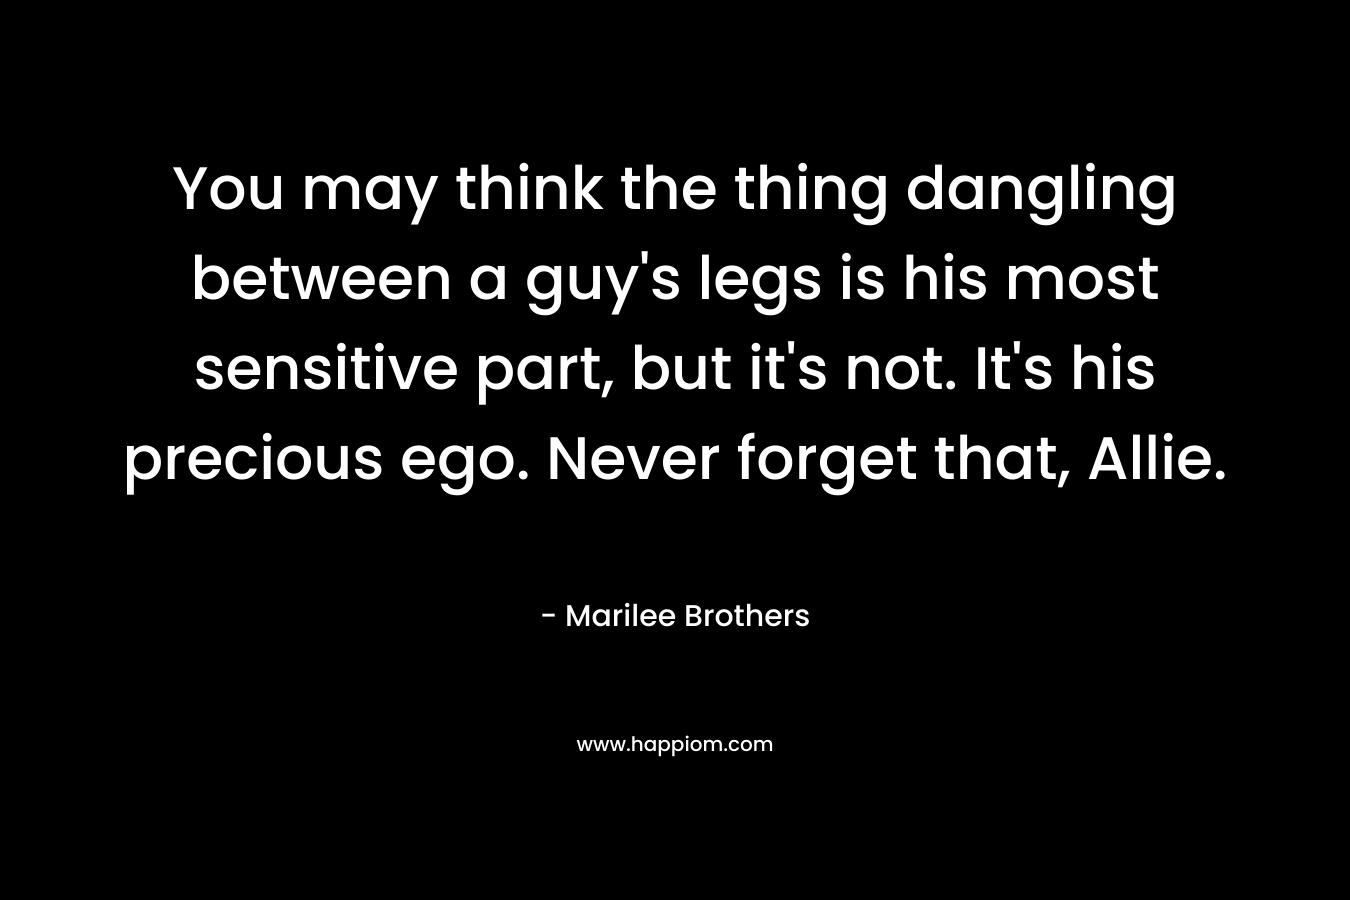 You may think the thing dangling between a guy’s legs is his most sensitive part, but it’s not. It’s his precious ego. Never forget that, Allie. – Marilee Brothers